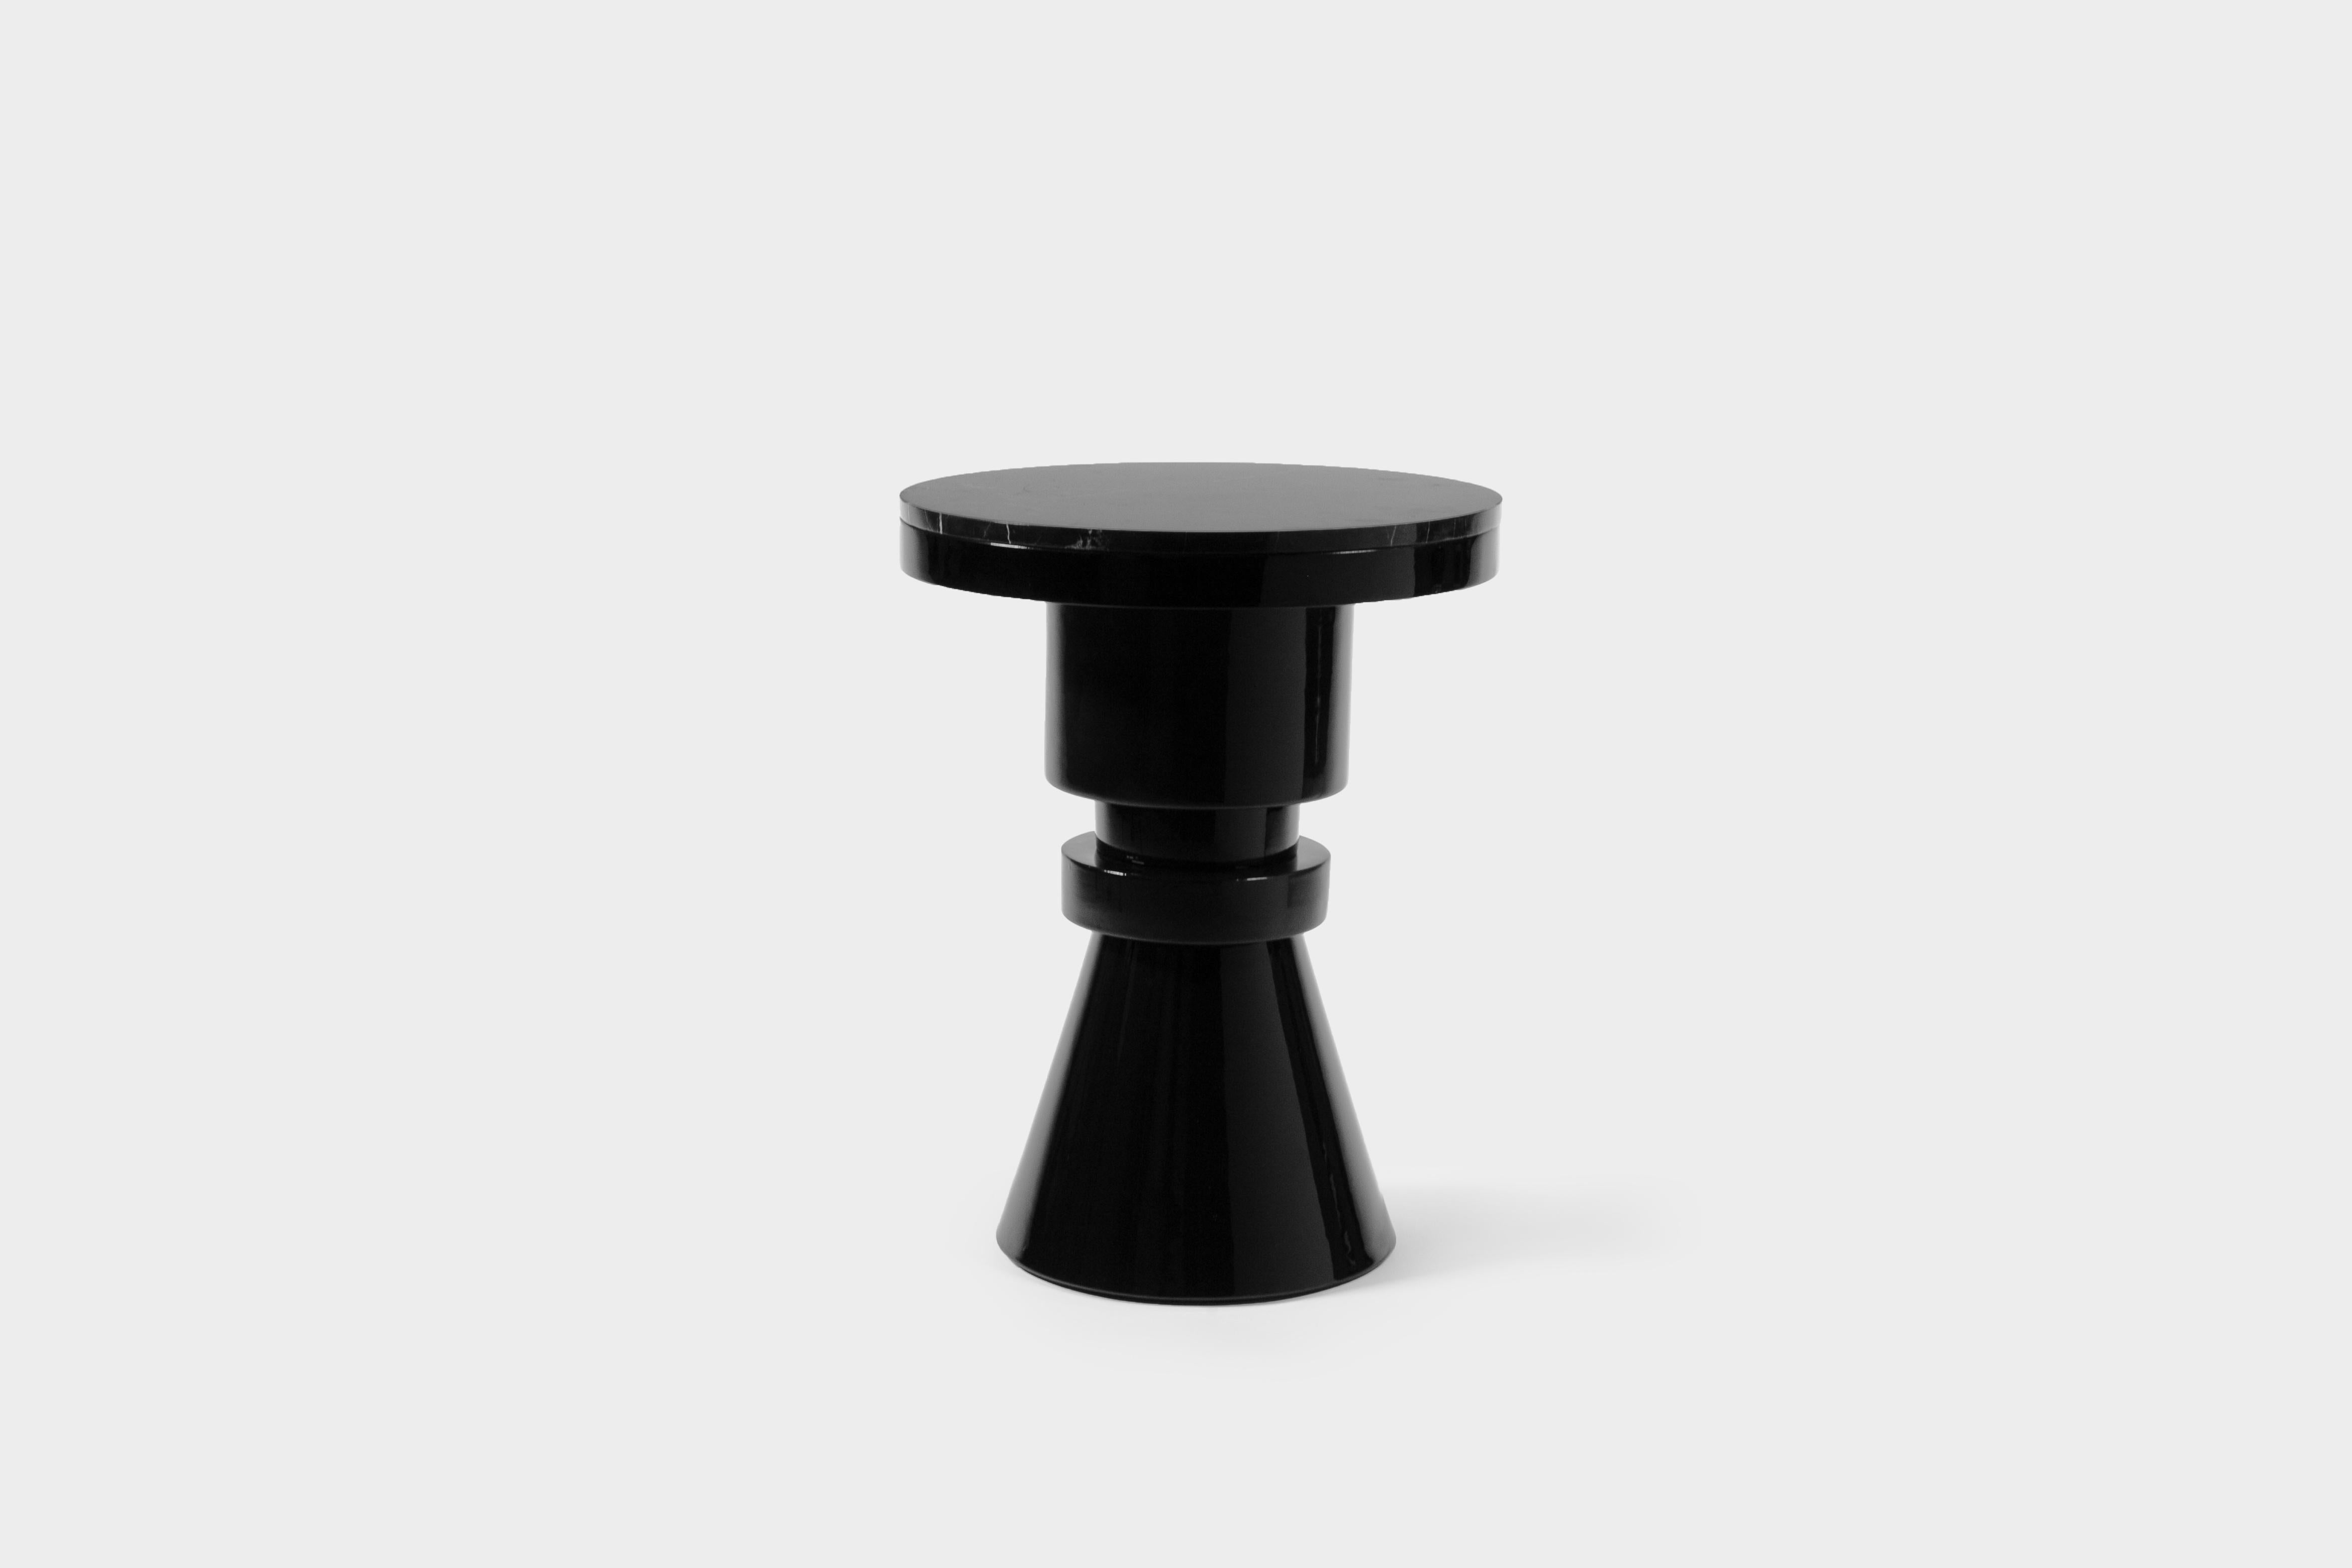 Ceramic and marble side table by Eric Willemart
Materials: Top: Polished Nero marquina marble plate embedded in a
black lacquered wooden tray
Body: Handcrafted ceramic glazed in black
Base: Black lacquered wood on an aluminum plate
Dimensions: